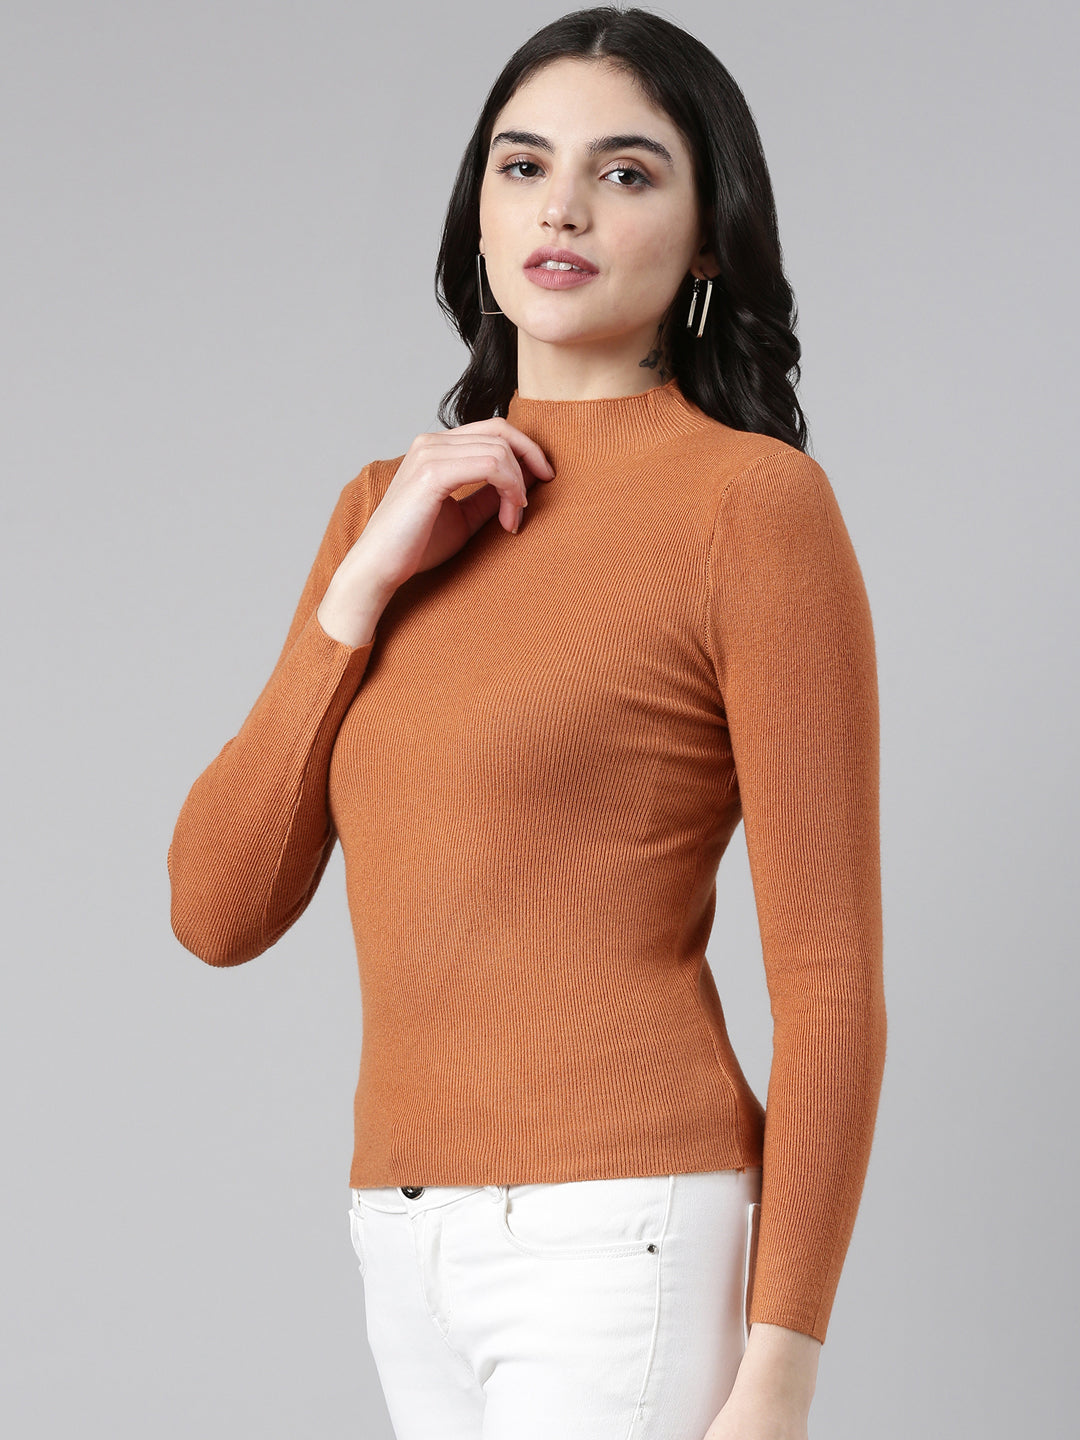 High Neck Solid Regular Sleeves Fitted Camel Brown Top